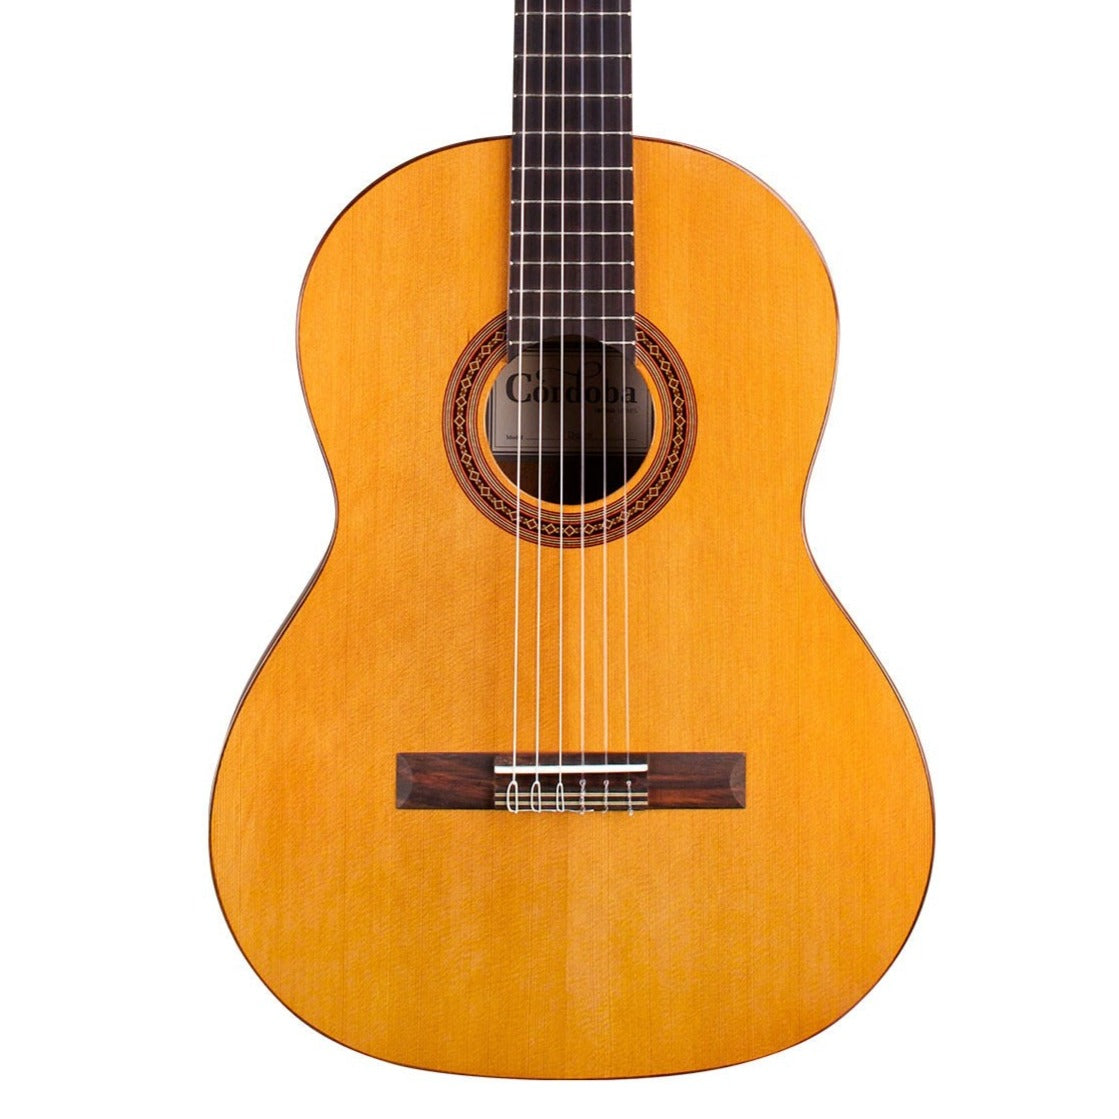 Cordoba Dolce 7/8 Classical Guitar - Solid Canadian Cedar Top, Mahogany Back & Sides, Smallsized & Lightweight Classical Guitar, Best for Traveling